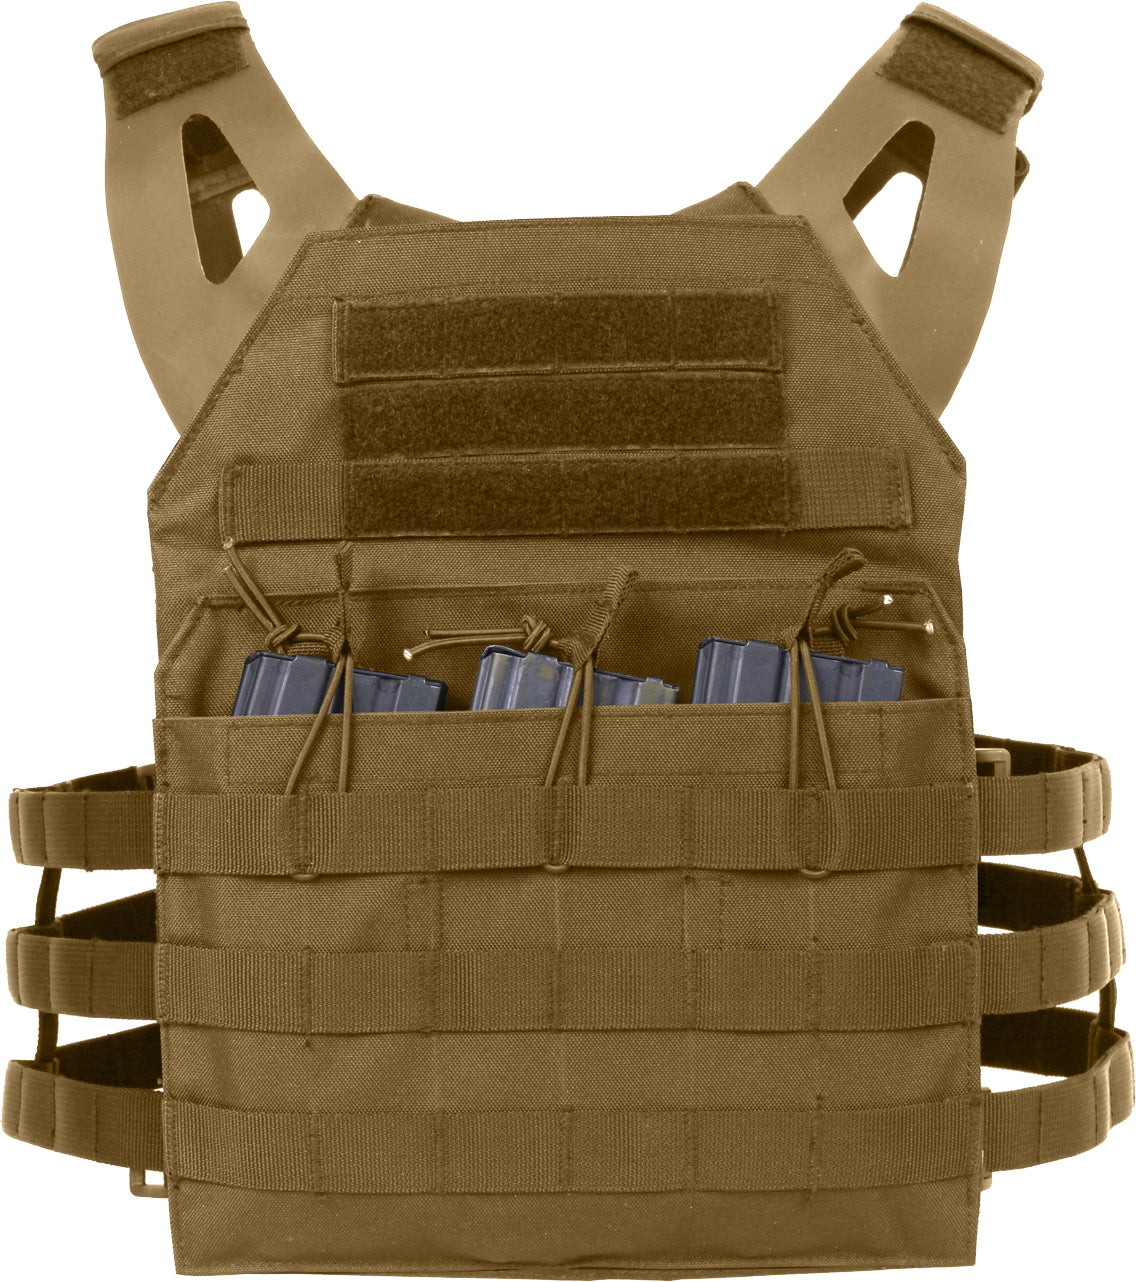 Coyote Brown Lightweight Armor Plate Carrier Vest